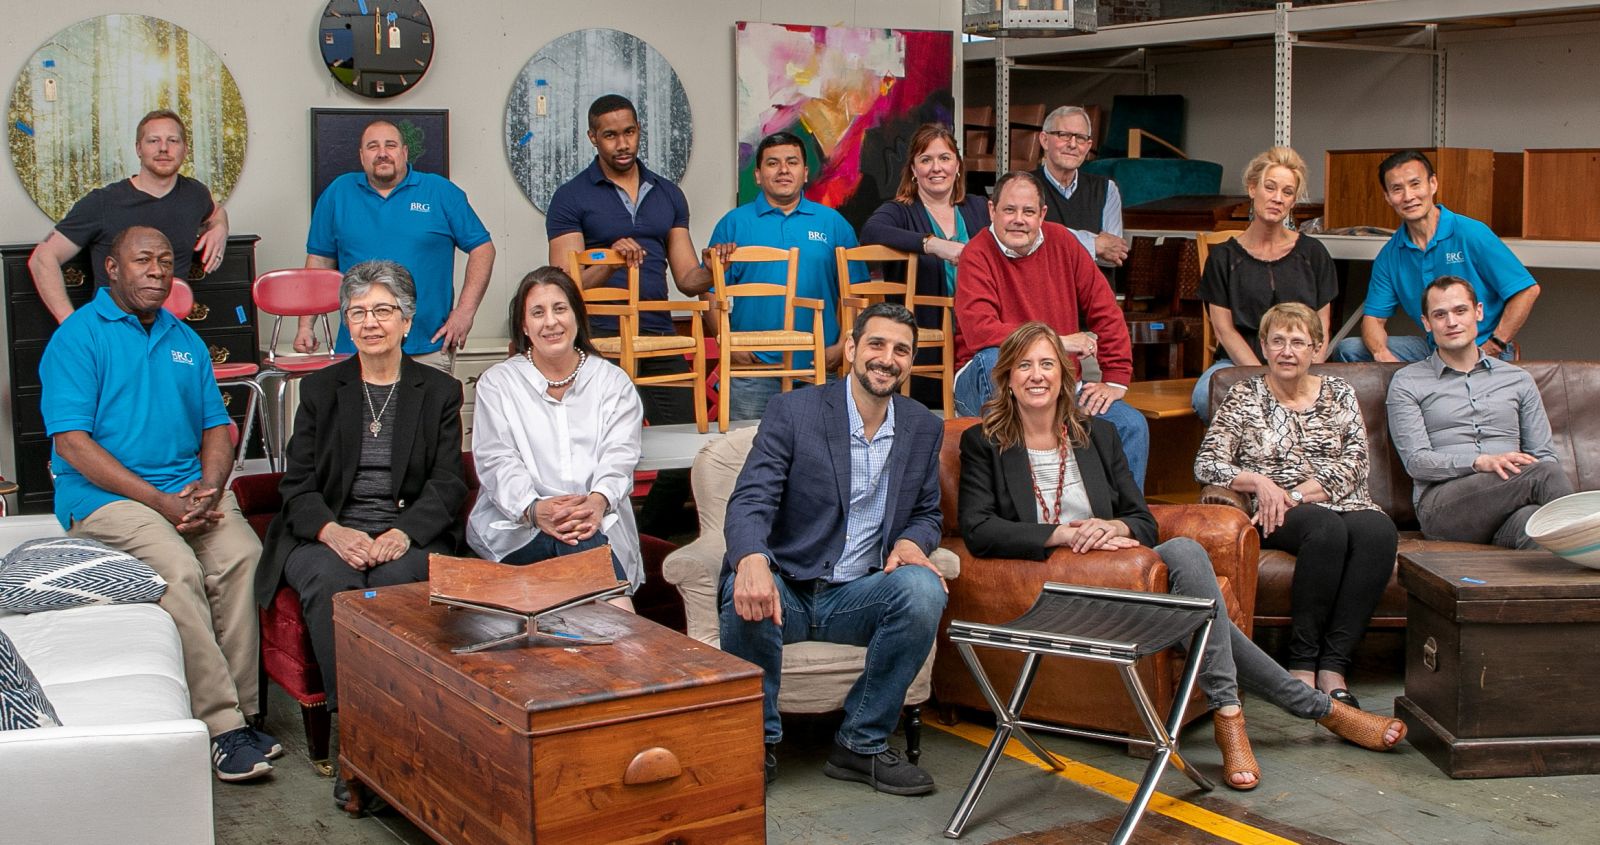 The BRG team poses for a photo inside the Bridgeport showroom with Managing Partners, Grant and Christie seated in the center.